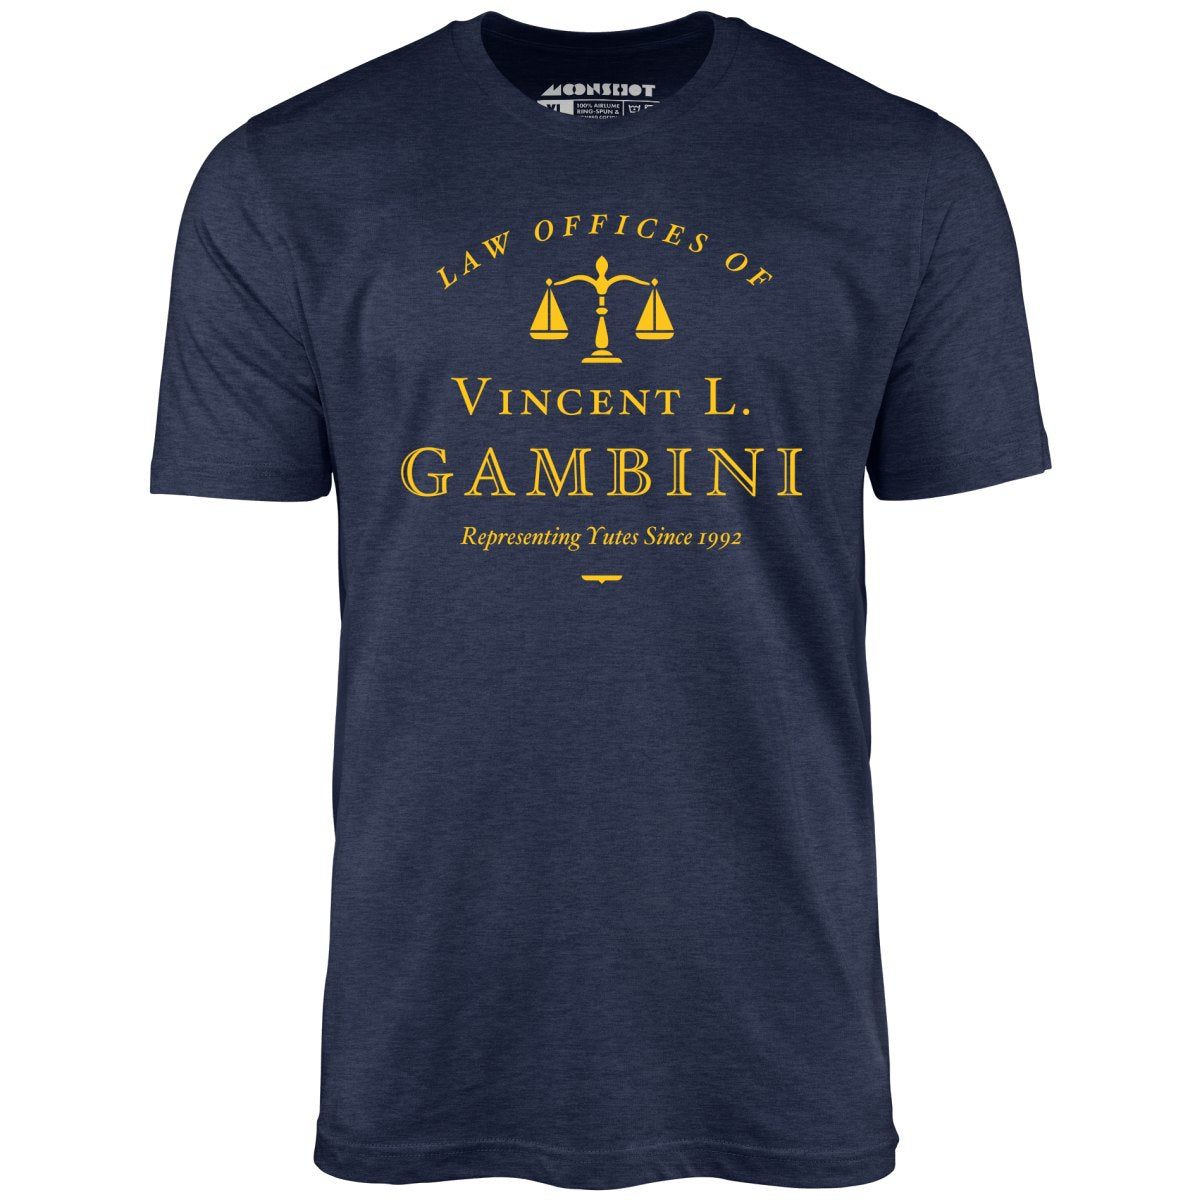 Law Offices of Vincent L. Gambini - Unisex T-Shirt